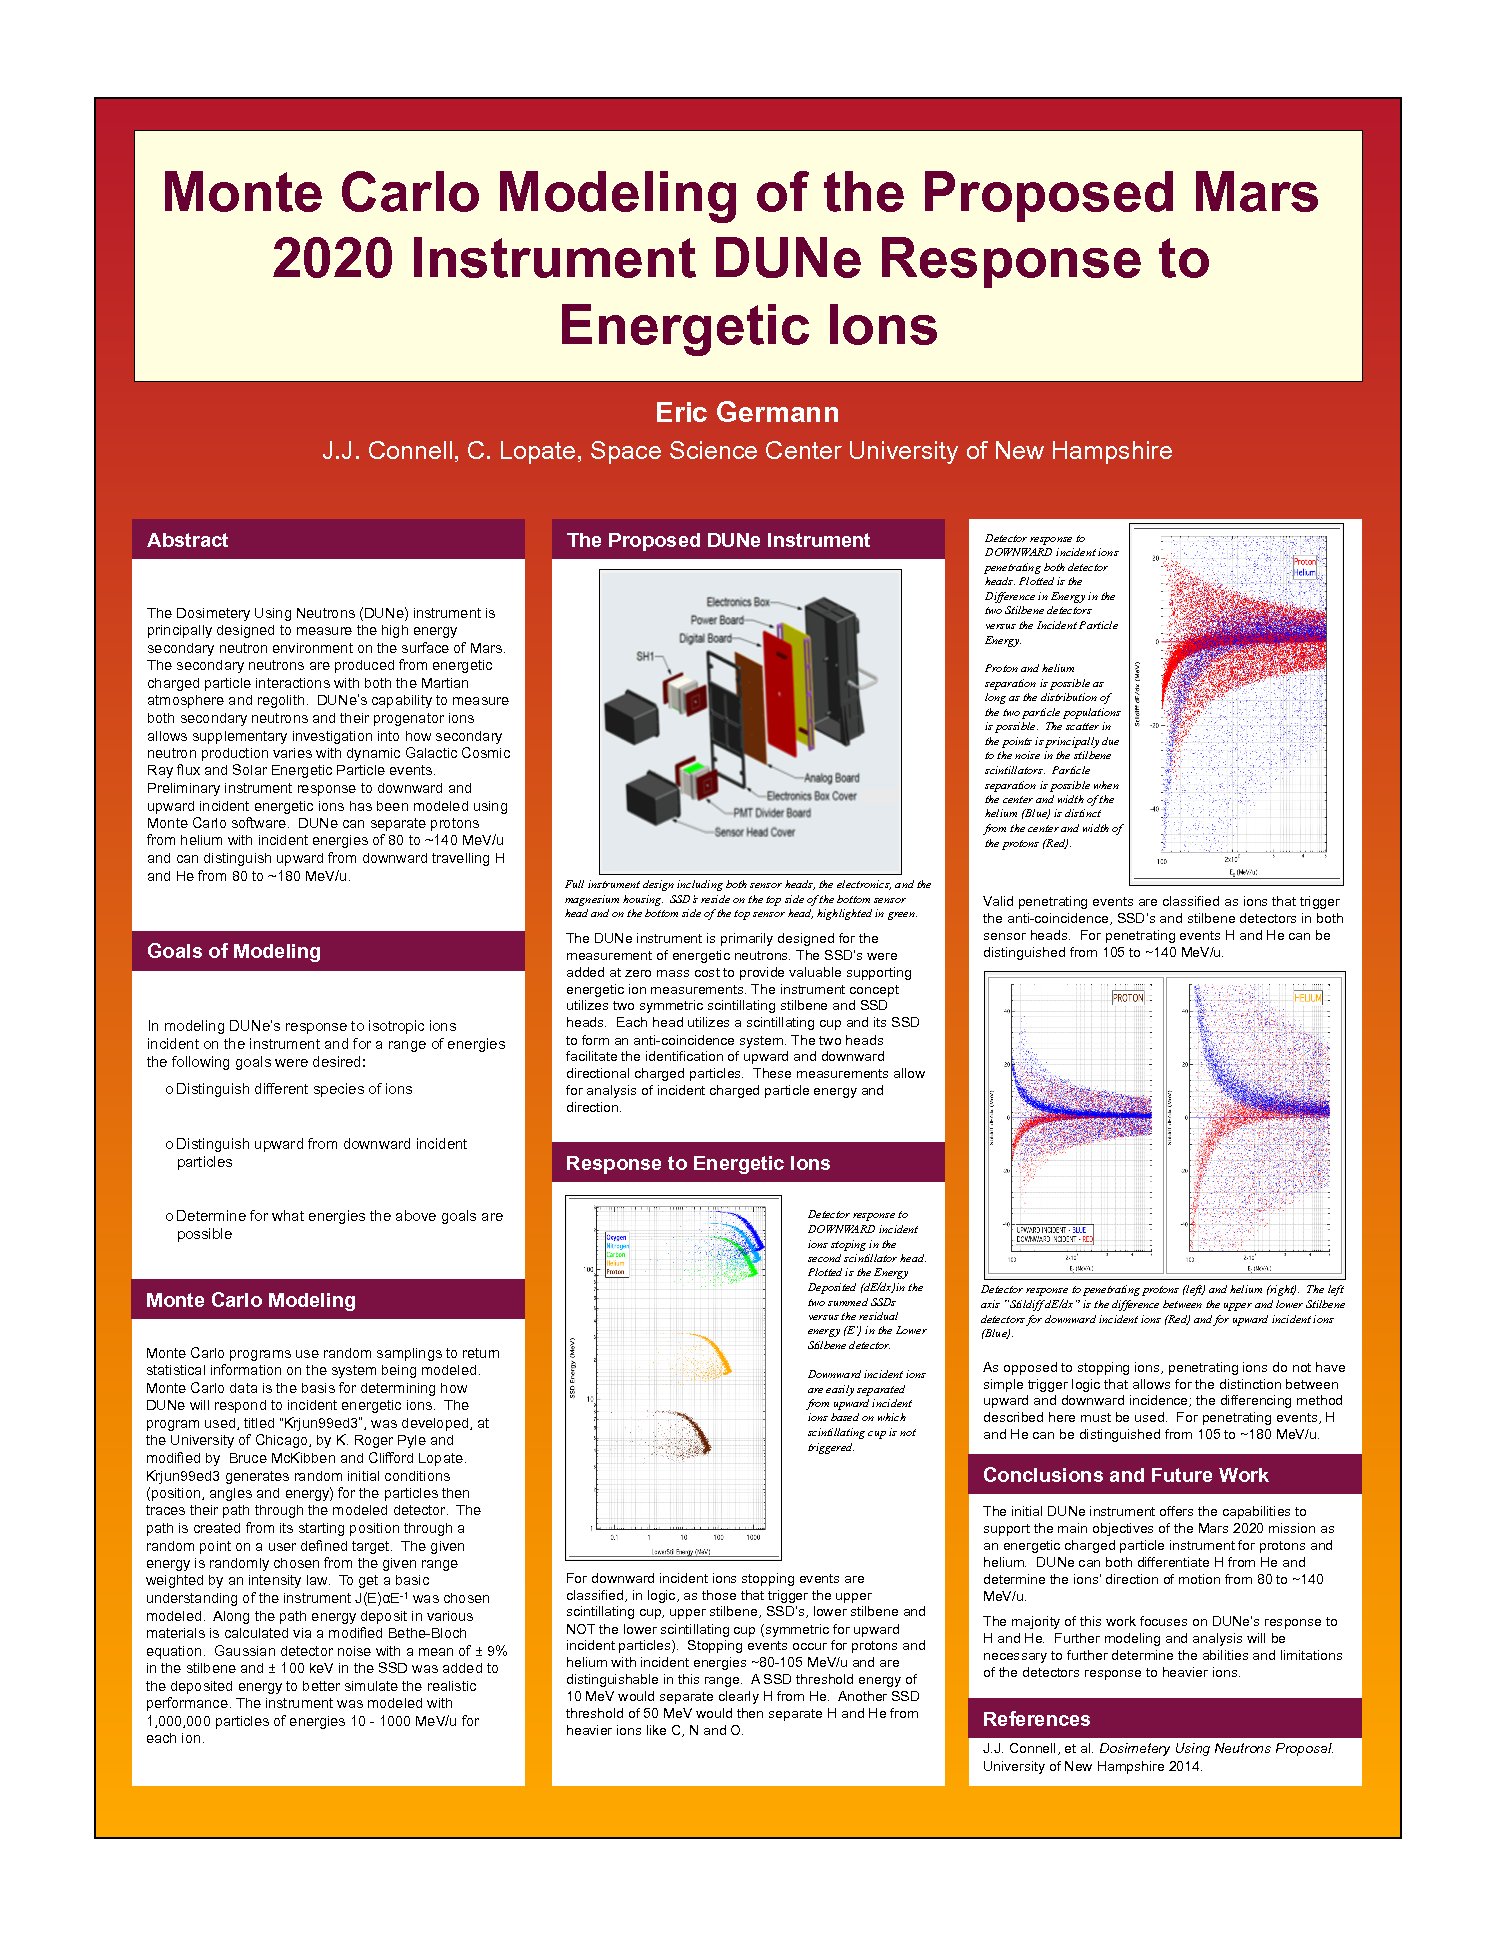 Monte Carlo Modeling Of The Proposed Mars 2020 Instrument Dune Response To Energetic Ions by ebw23